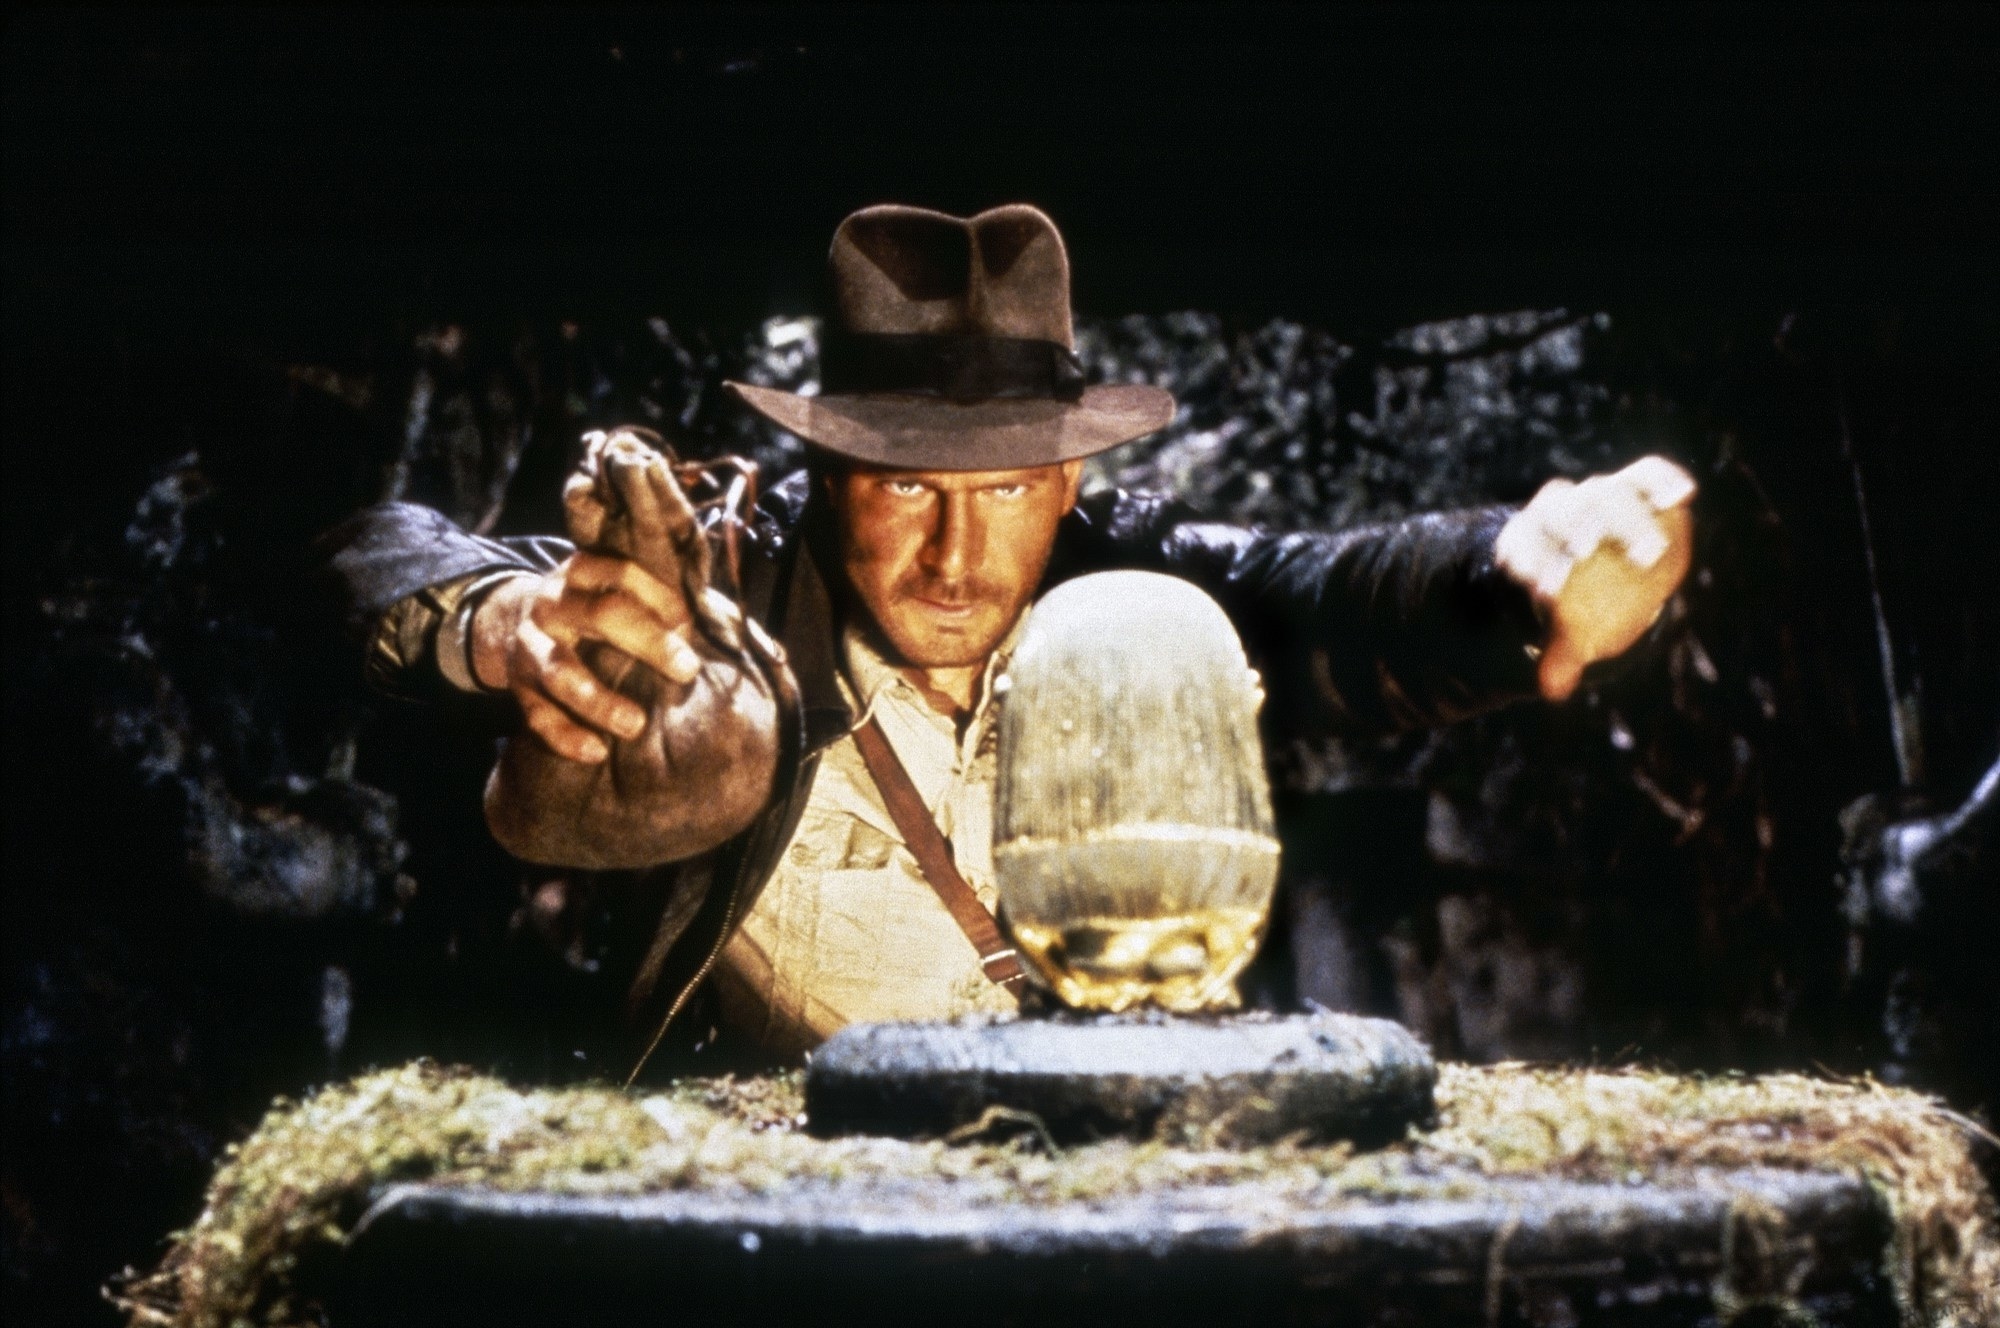 Indiana Jones holding a bag of sand ready to swap it out for an ancient gold idol